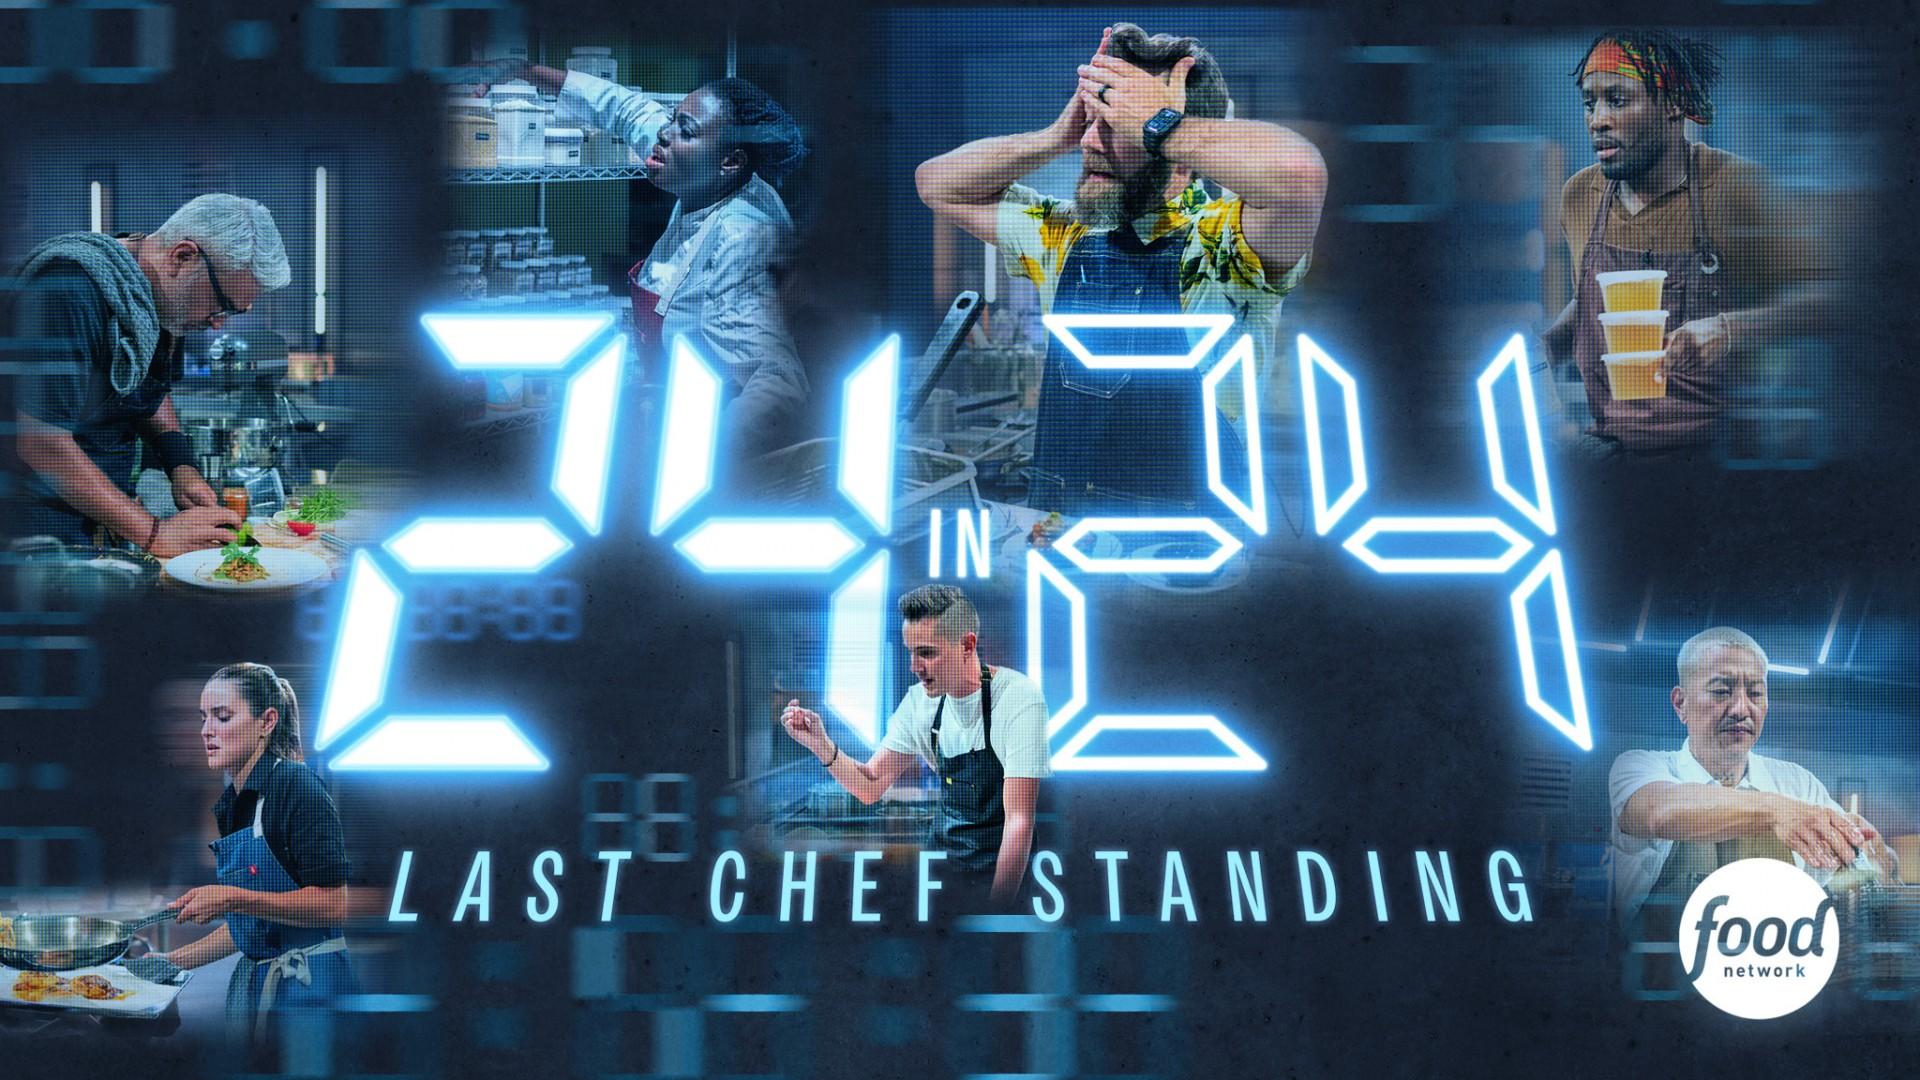 24 in 24: Last Chef Standing